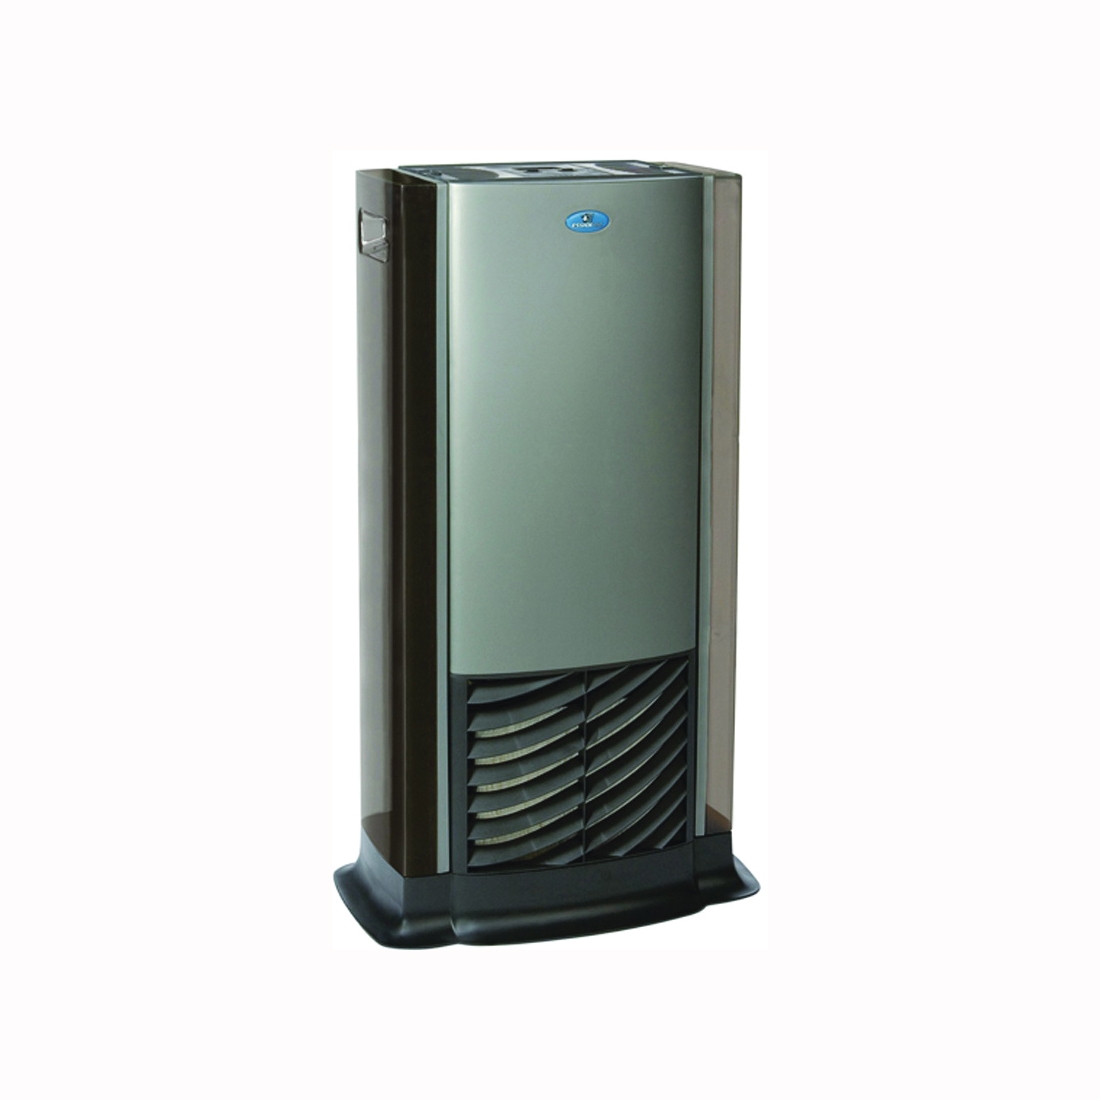 D46 720 Tower Humidifier, 120 V, 4-Speed, 1250 sq-ft Coverage Area, 2 gal Tank, Digital Control